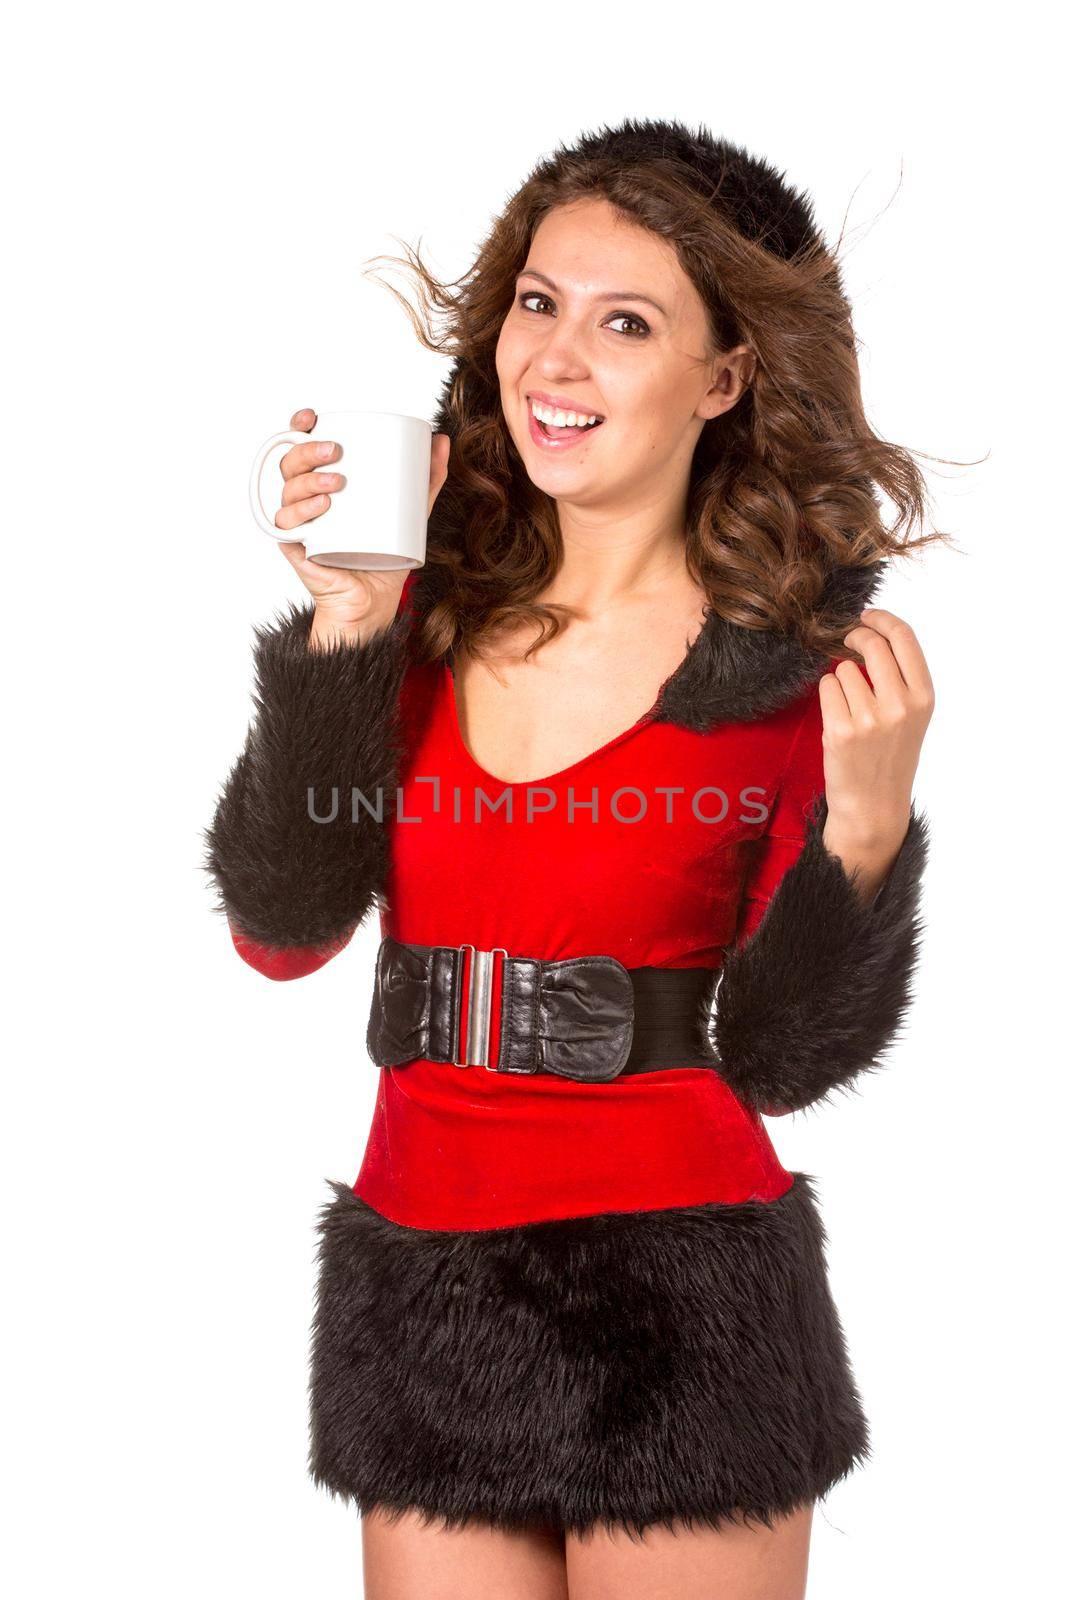 Pretty girl in christmas dress with cup of tea, isolated on white